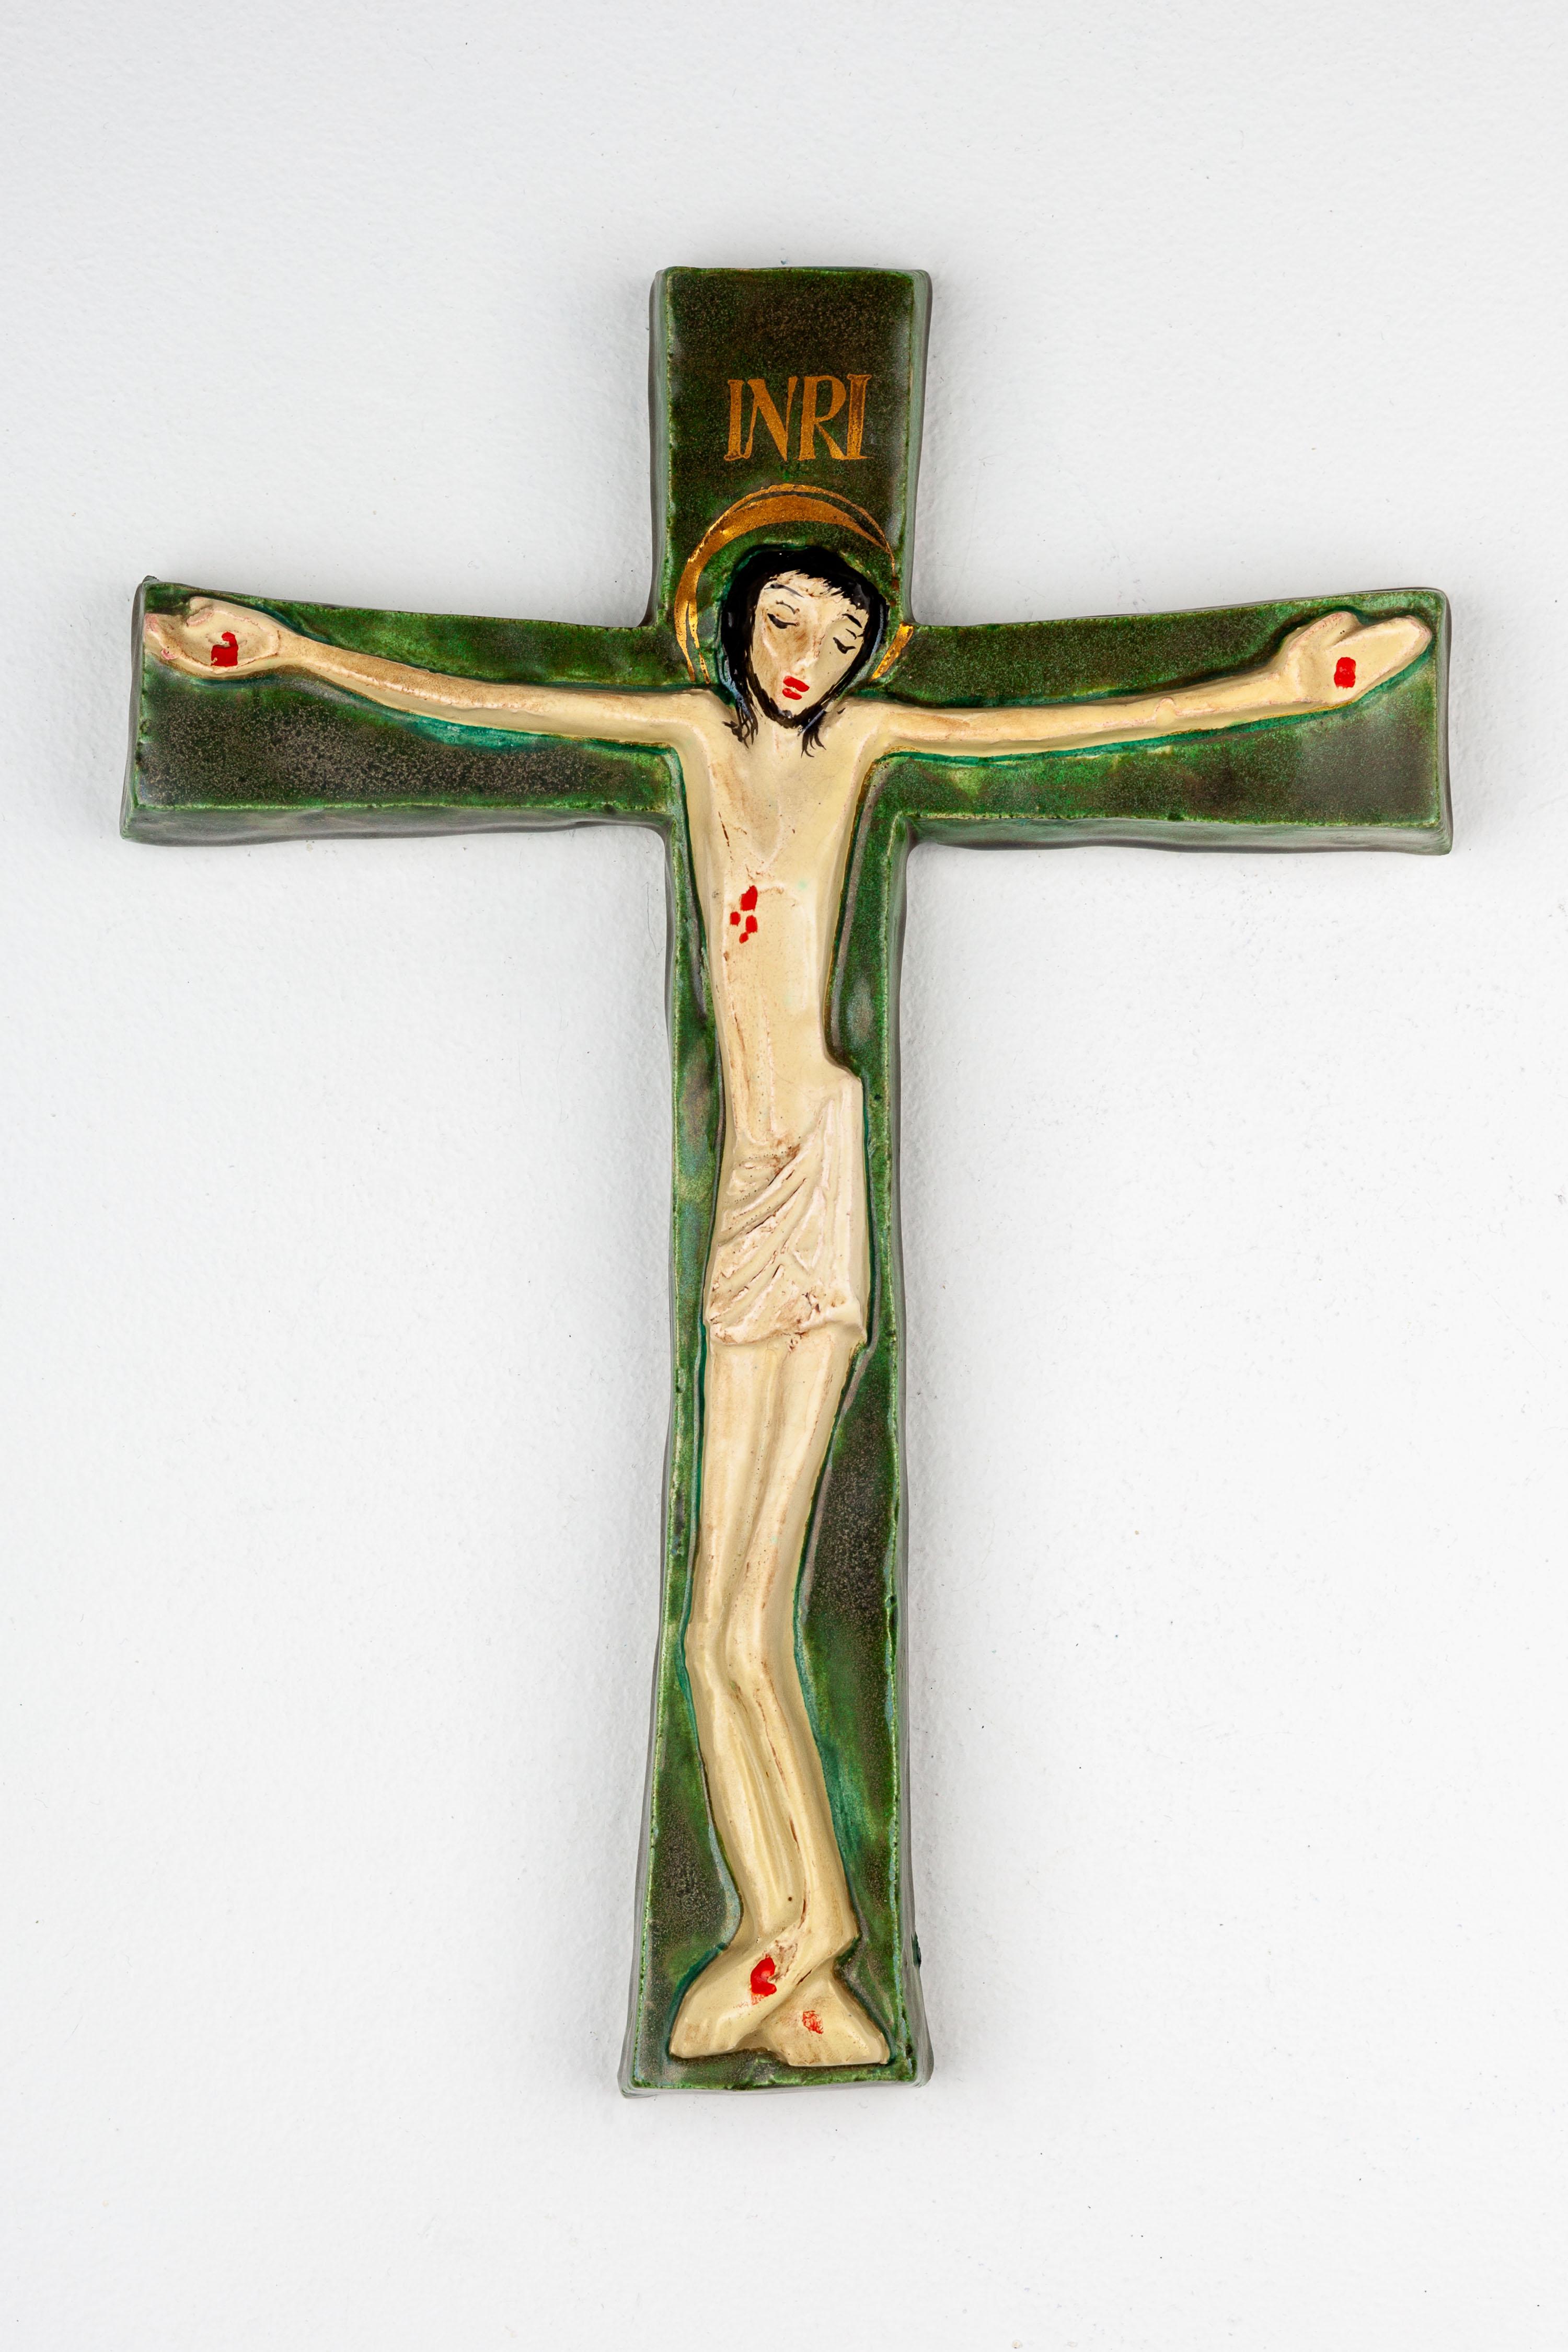 This ceramic crucifix is a distinctive artifact of mid-century European studio pottery, highlighting the period's unique blend of traditional religious motifs with modern artistic sensibilities. The figure of Christ is sculpted in a simplified,